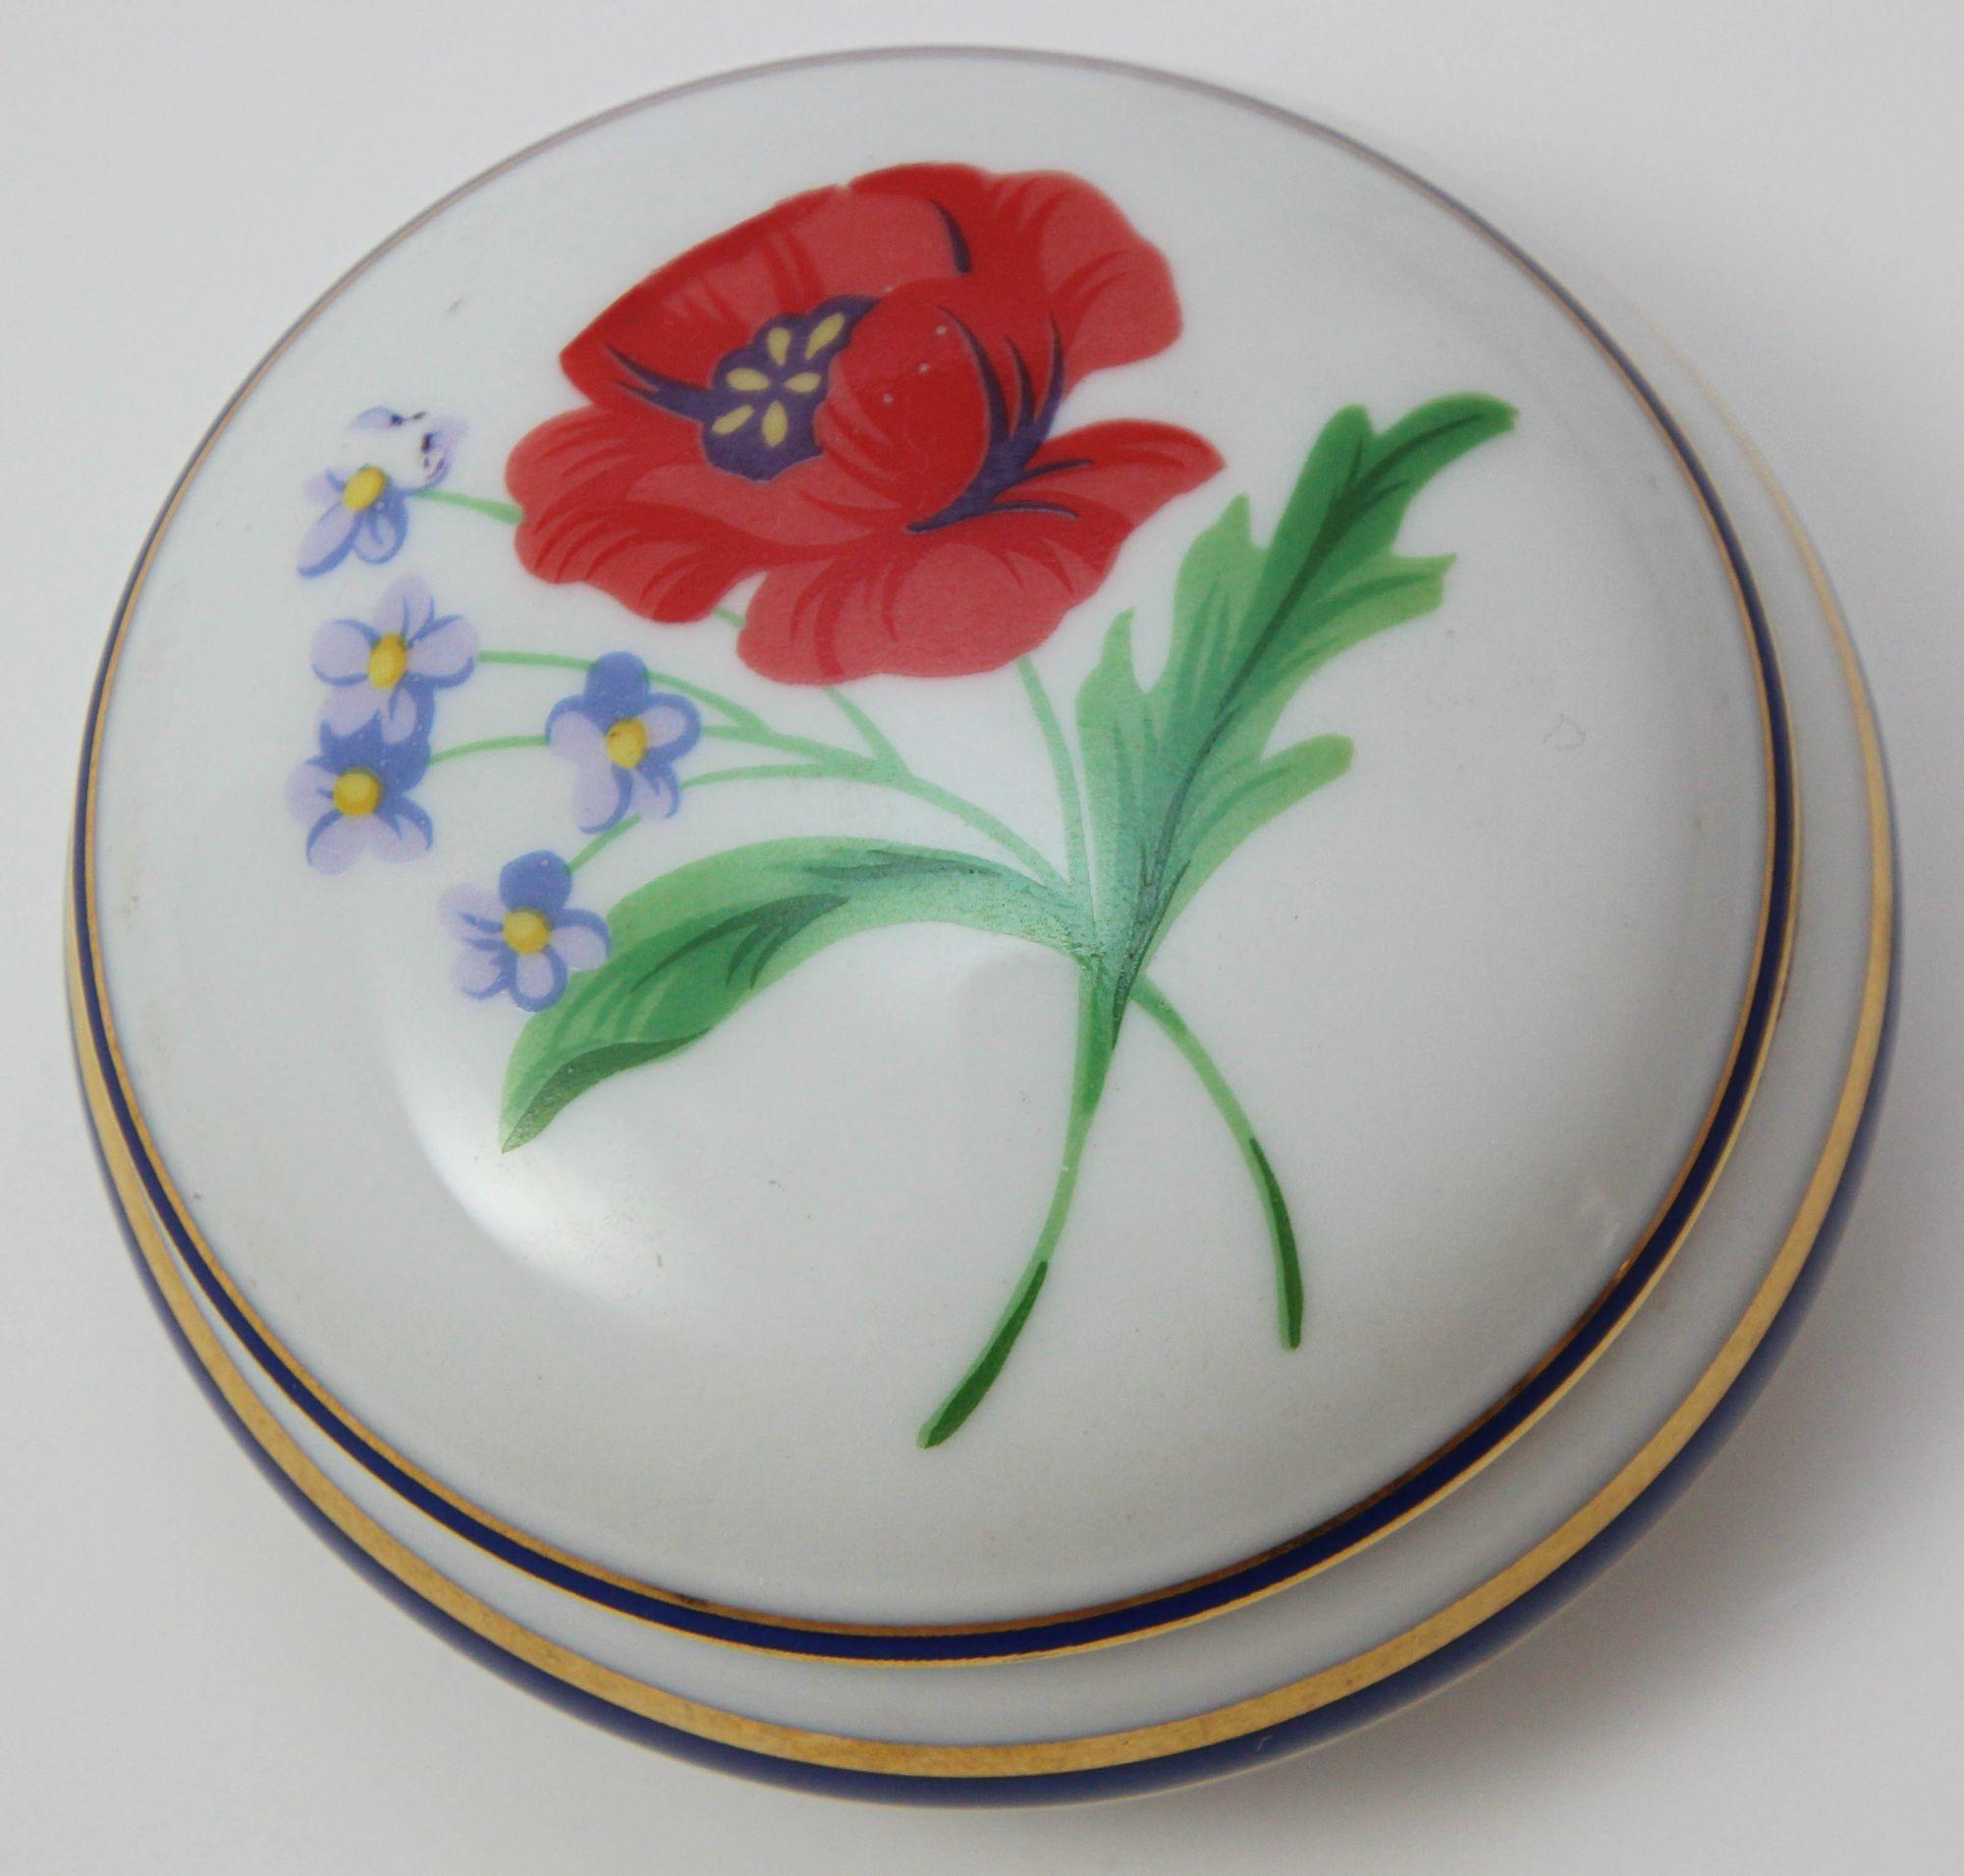 Tiffany & Co. Limoges France American Garden Round Porcelain Collectible Box For Sale 2